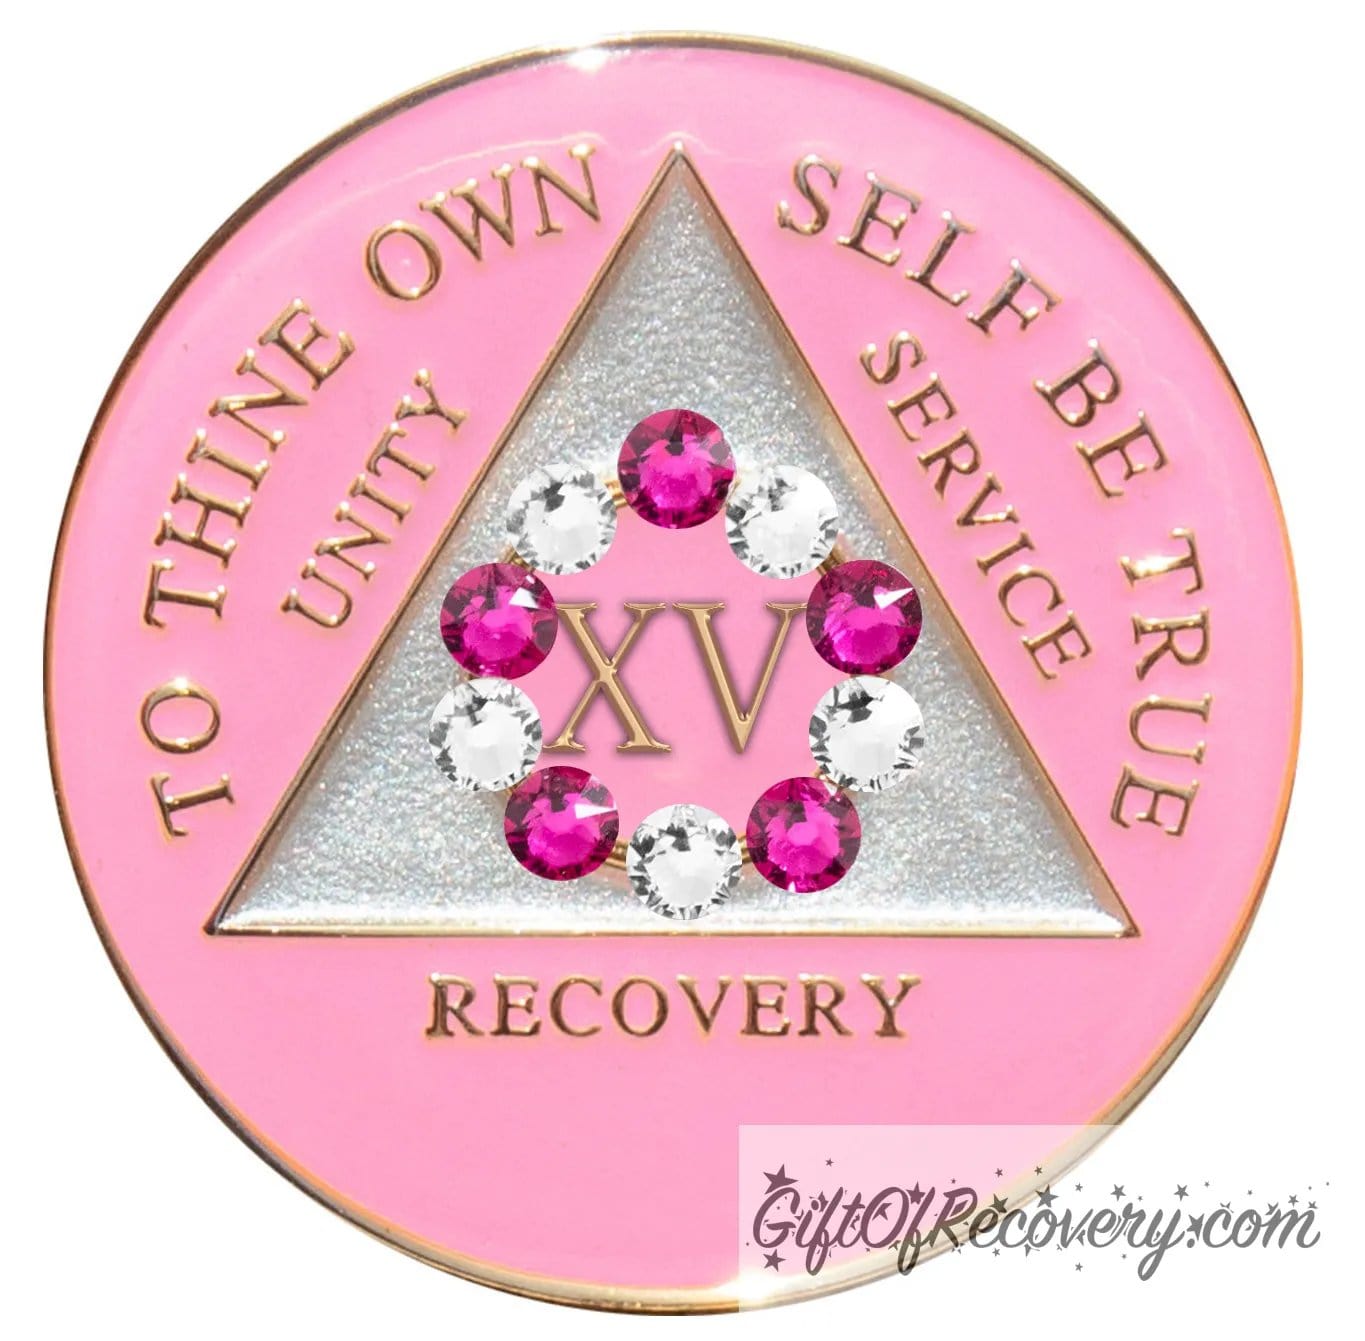 15 year princess pink AA medallion with a pearl white triangle center and pink circle, surrounding the roman numeral 15 are 10 genuine crystals, 5 dark pink and 5 clear, perfect for your favorite sober princess, to thine own self be true, unity, service, recovery, the rim of the medallion, the raised triangle outline, and the roman numeral year, are in 14k gold, sealed with resin for a glossy finish.